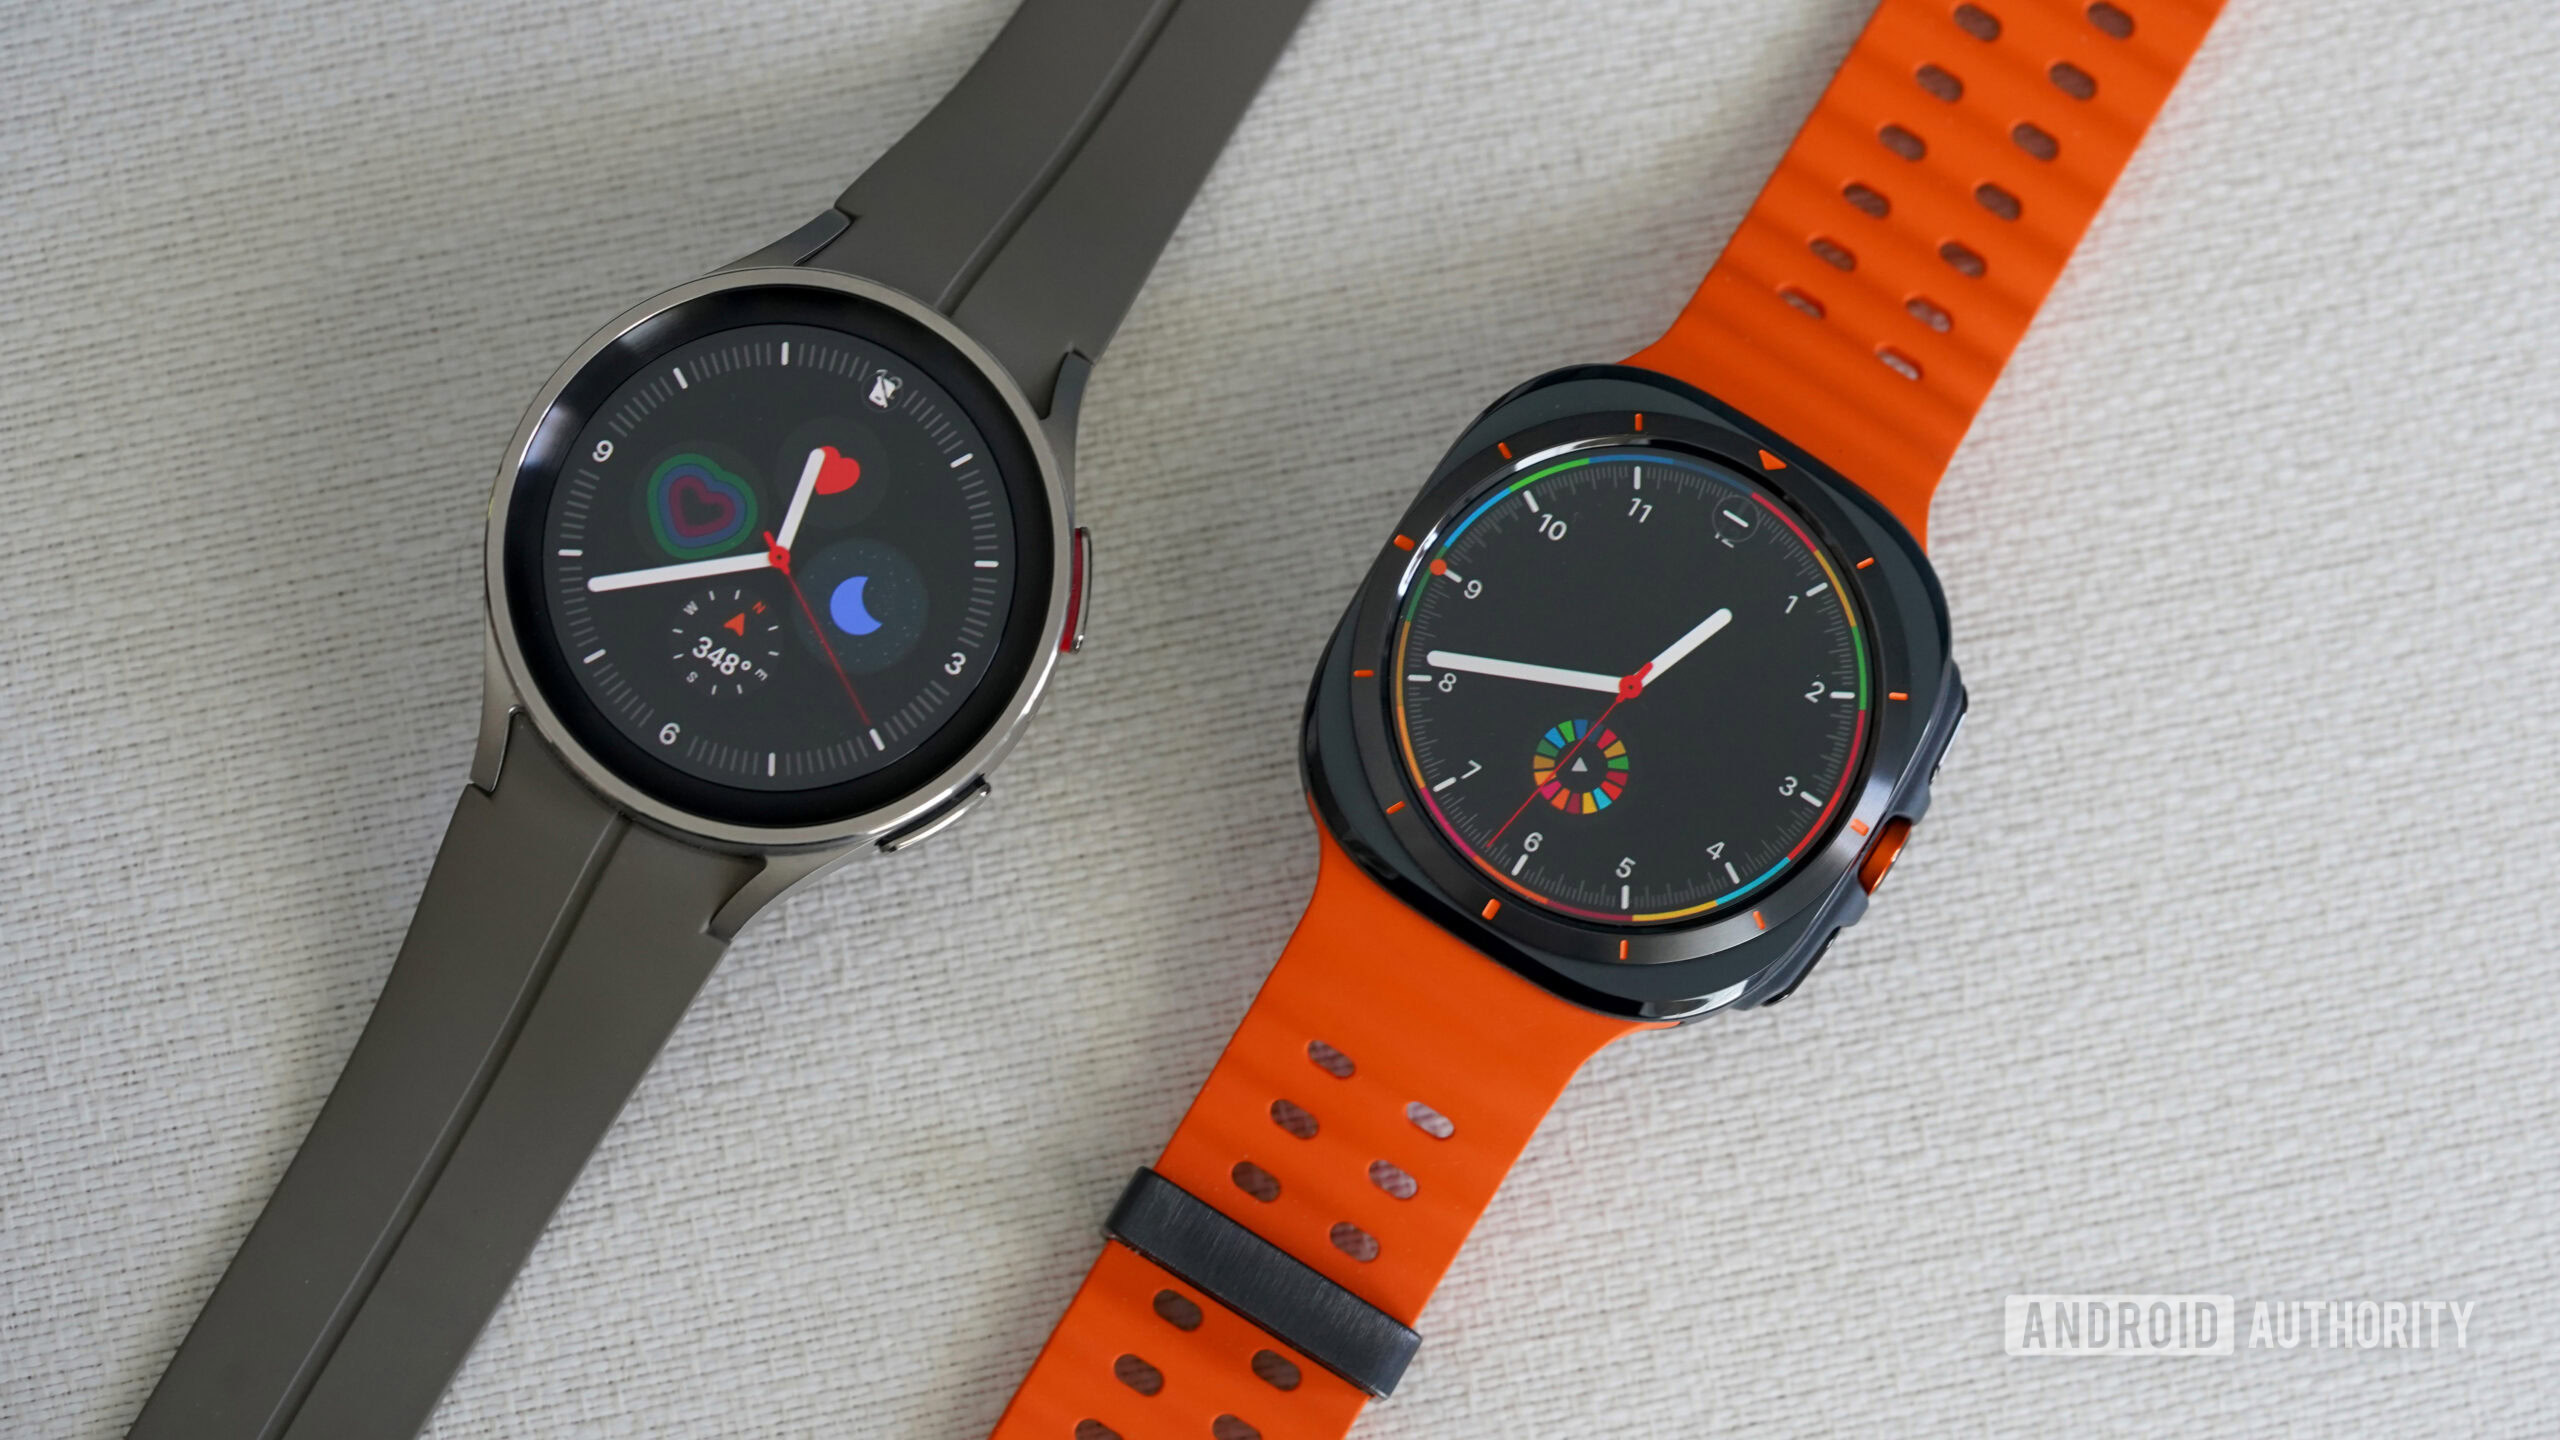 Forget Ultra, go Pro: Why Samsung’s older premium smartwatch is the better buy